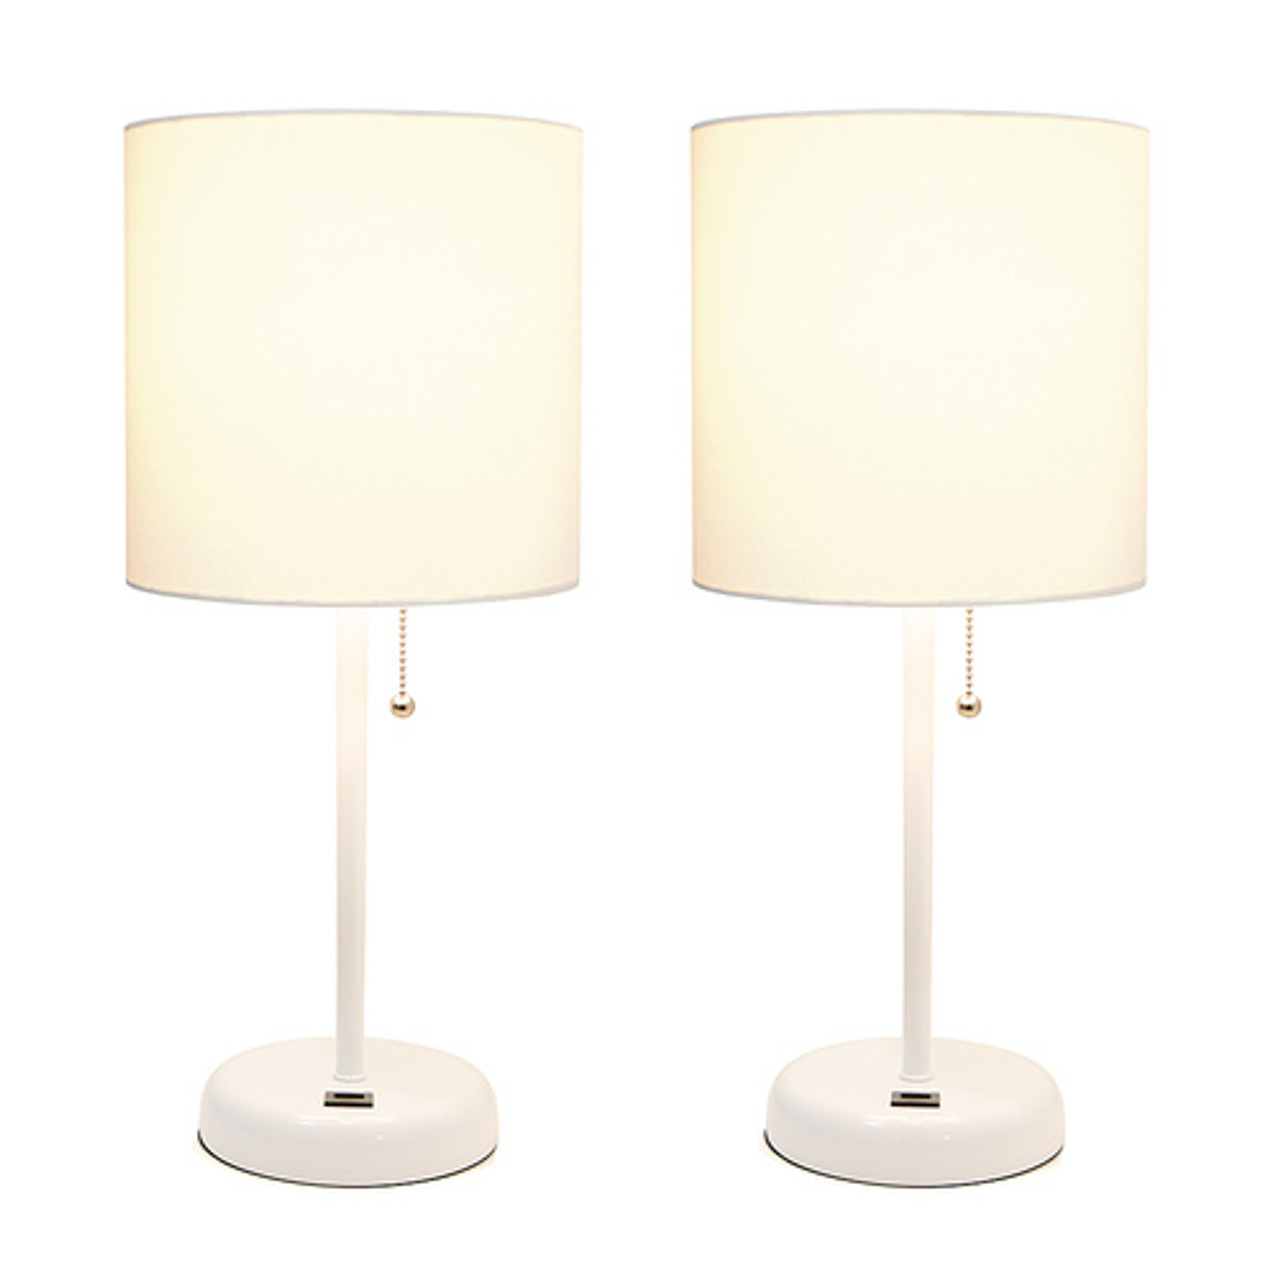 LimeLights White Stick Lamp with USB charging port and Fabric Shade 2 Pack Set, White